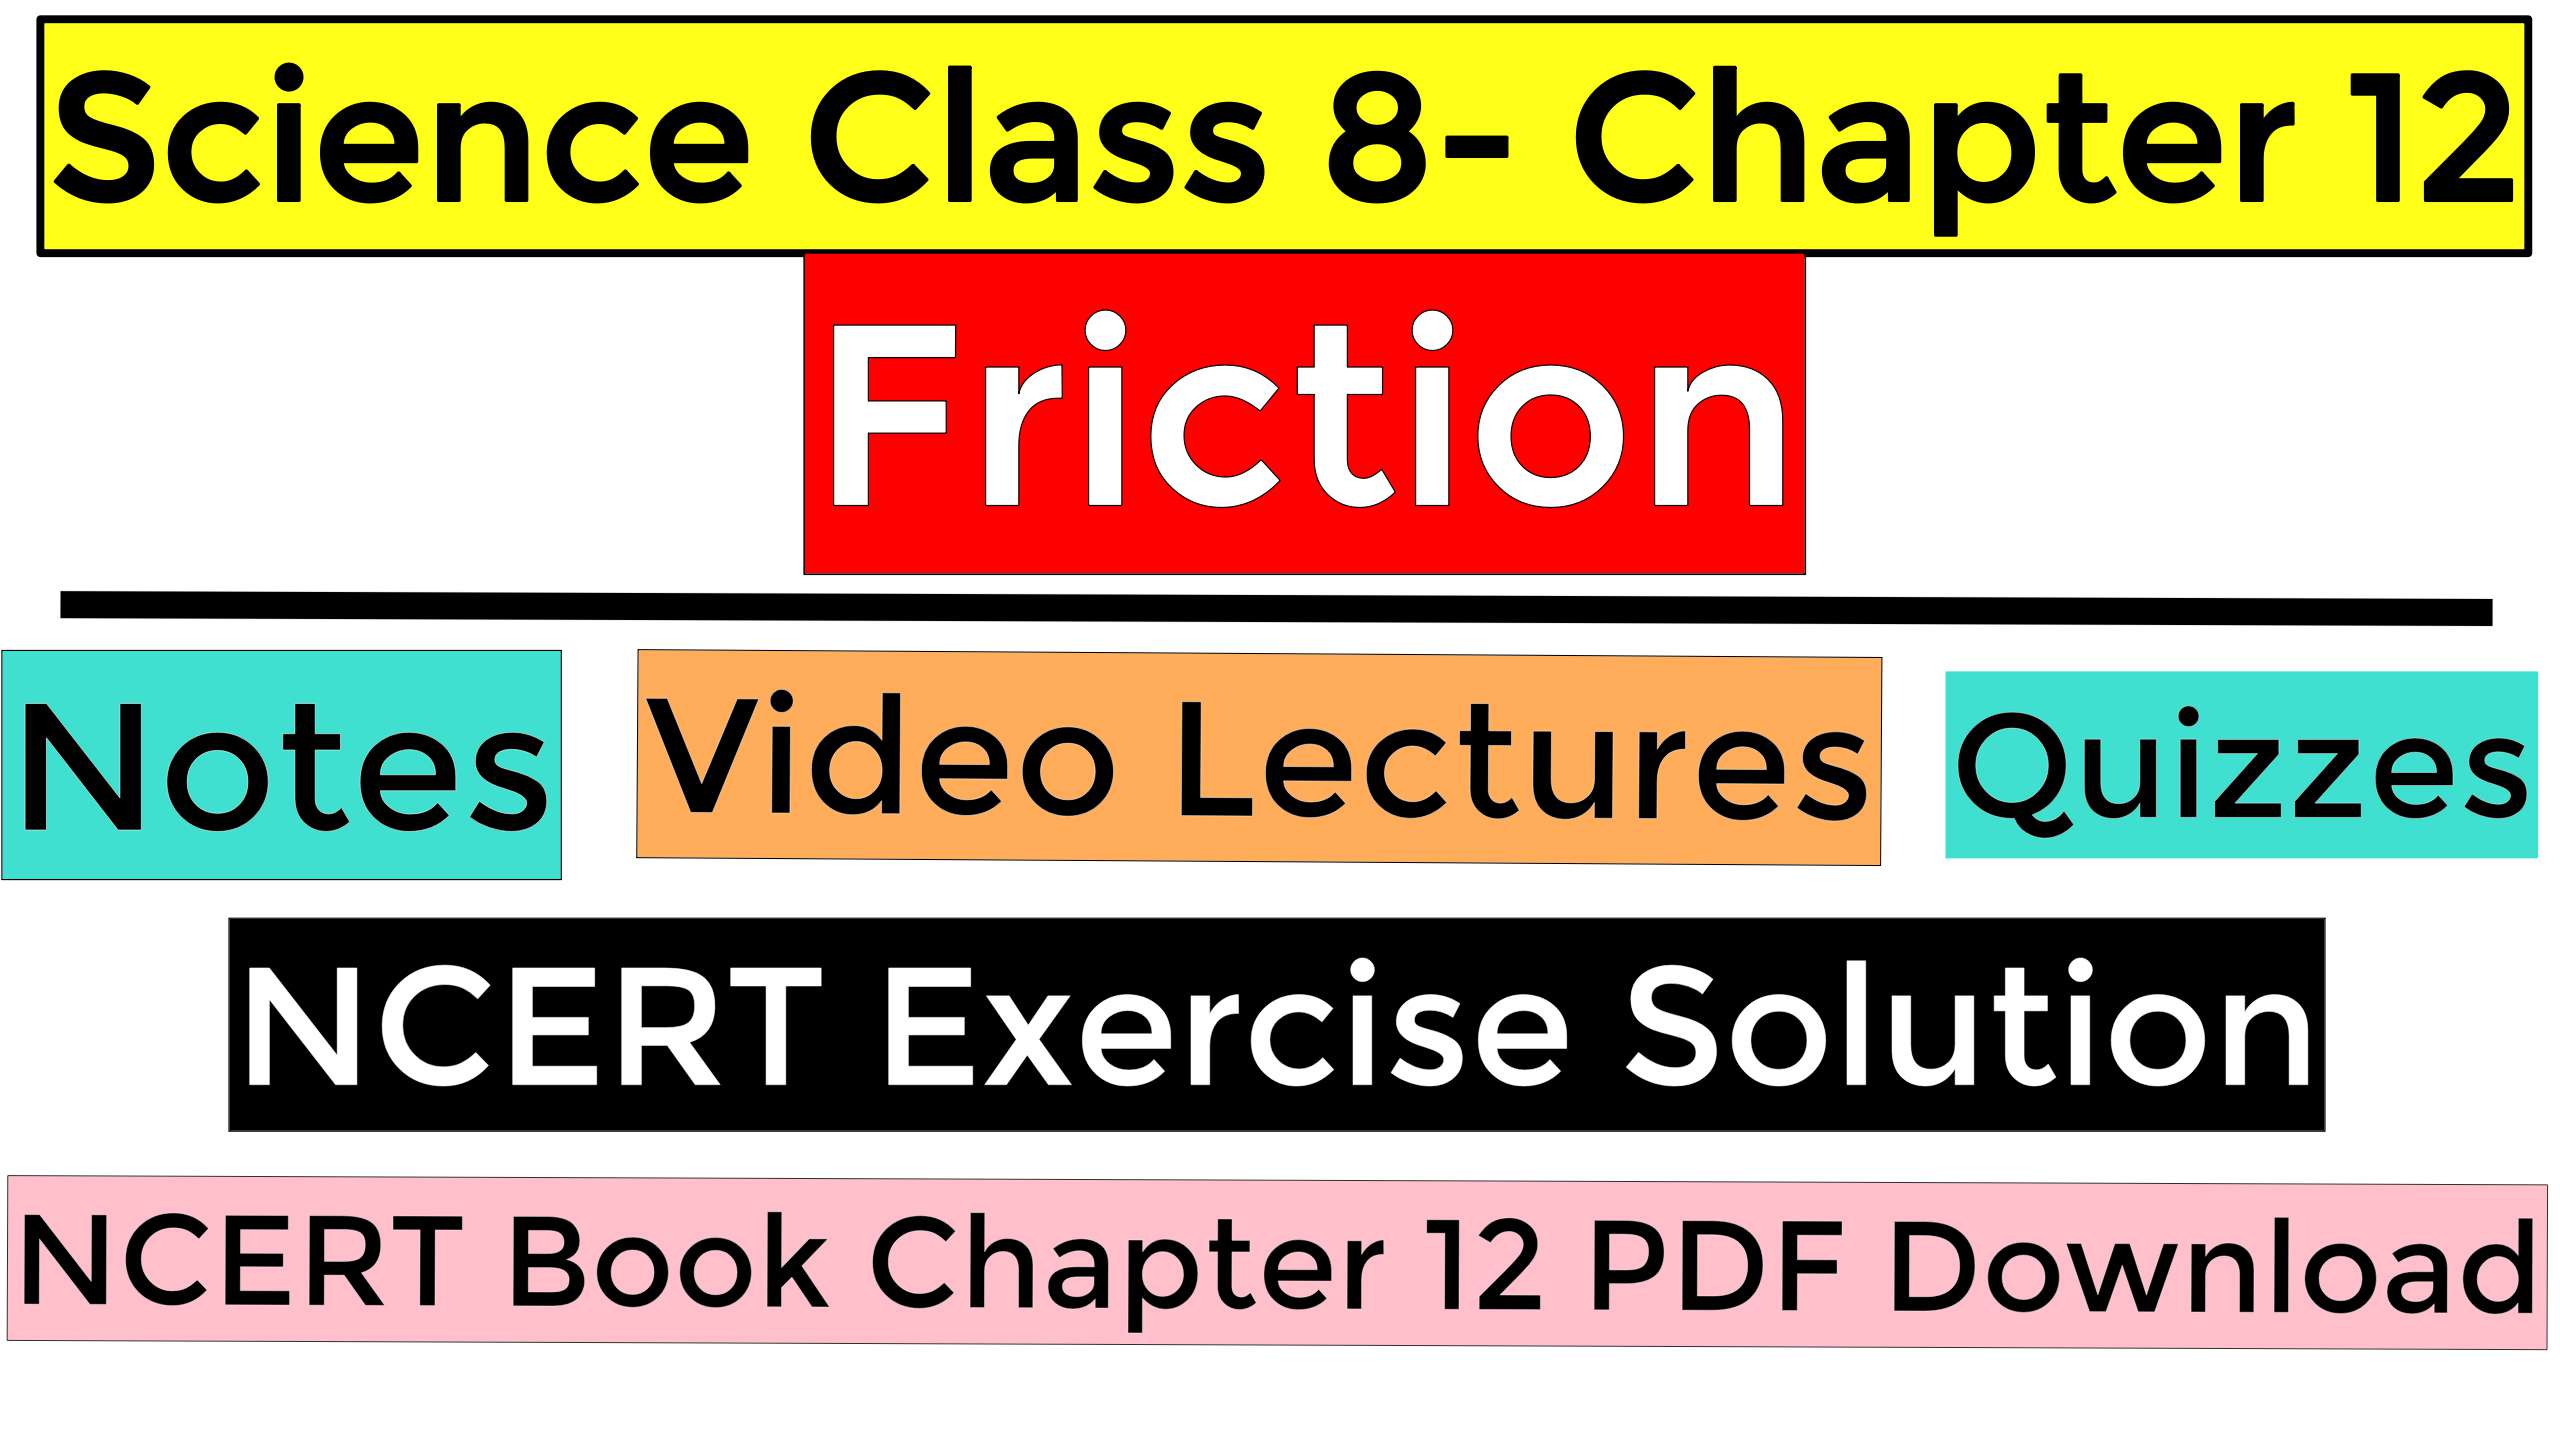 Science Class 8- Chapter 12- Friction- Notes, Video Lectures, NCERT Exercise Solution, Quizzes, NCERT Book Chapter 12 PDF Download